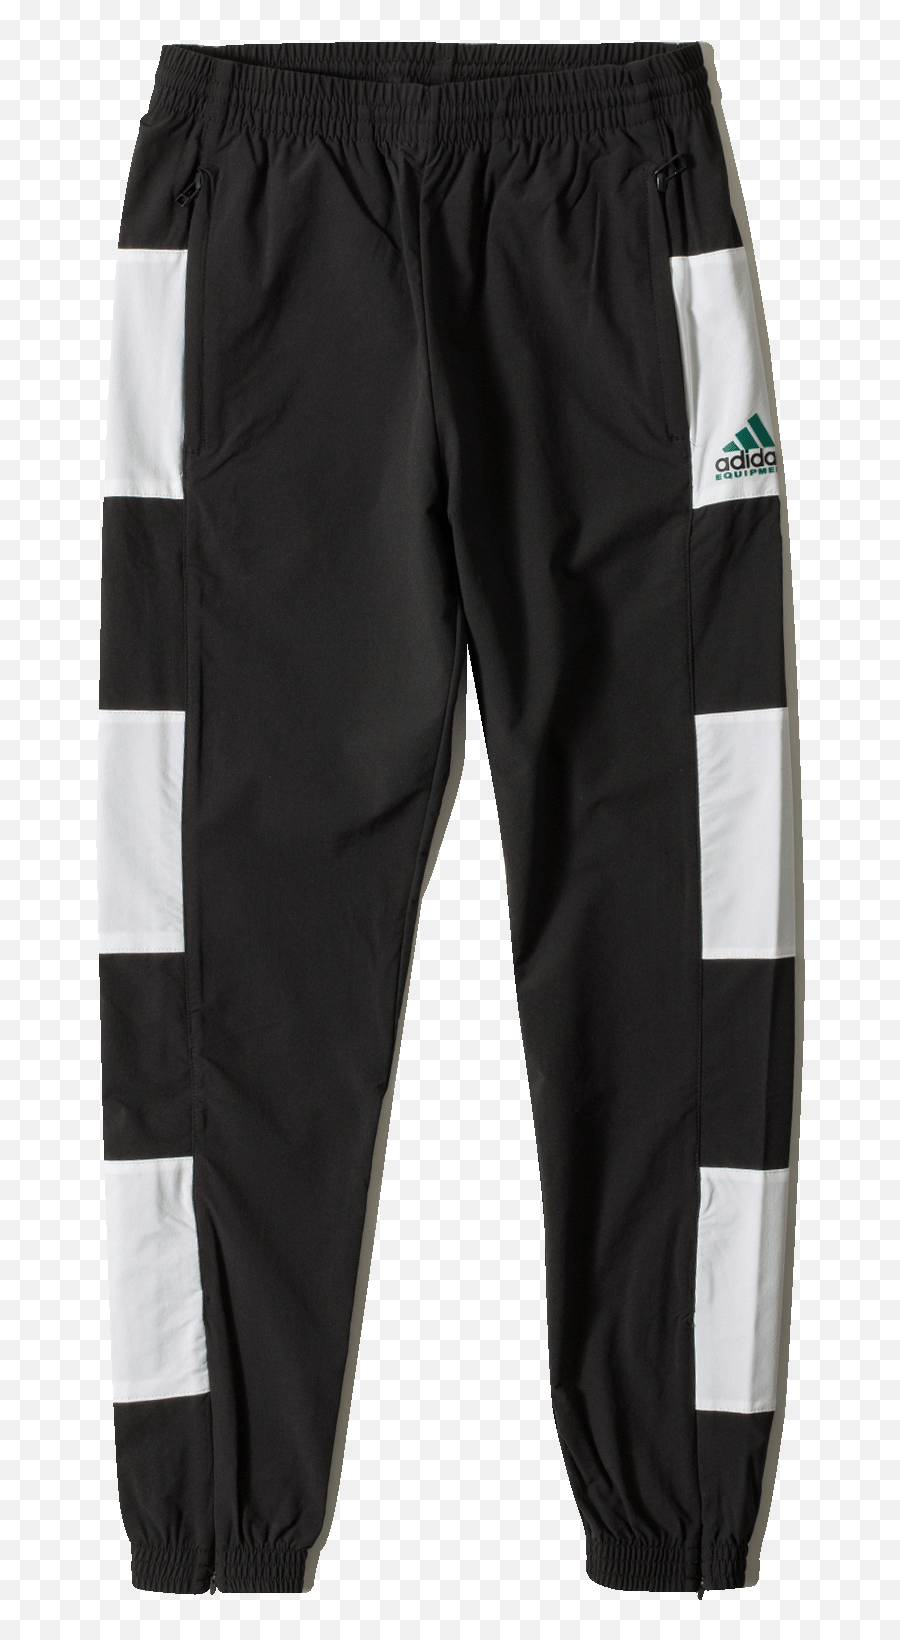 Adidas Originals Eqt 1to1 Track Pant - Adidas Eqt 1 To 1 Black And White Trackpant Png,Sweatpants Png